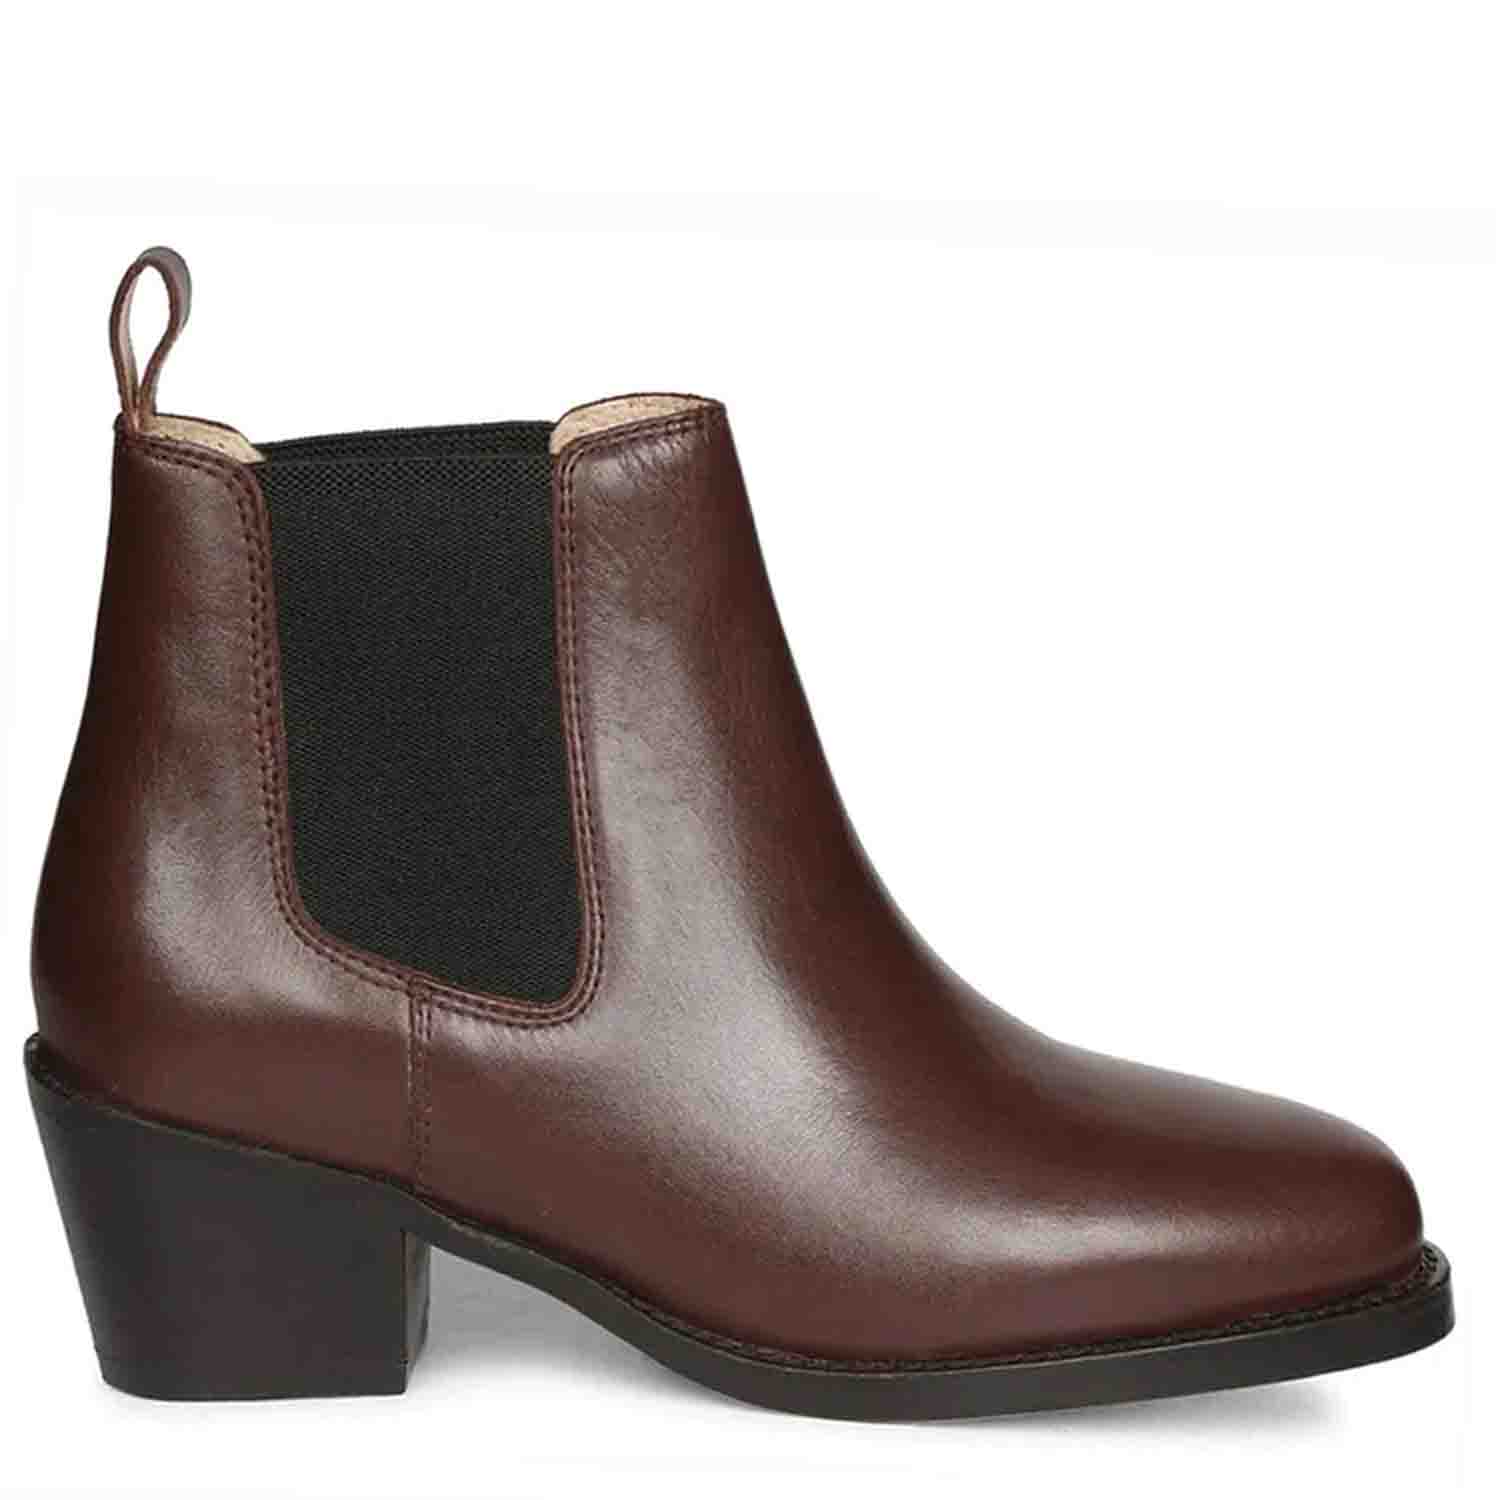 The Best Women's Leather Boots For Every Budget – SaintG India